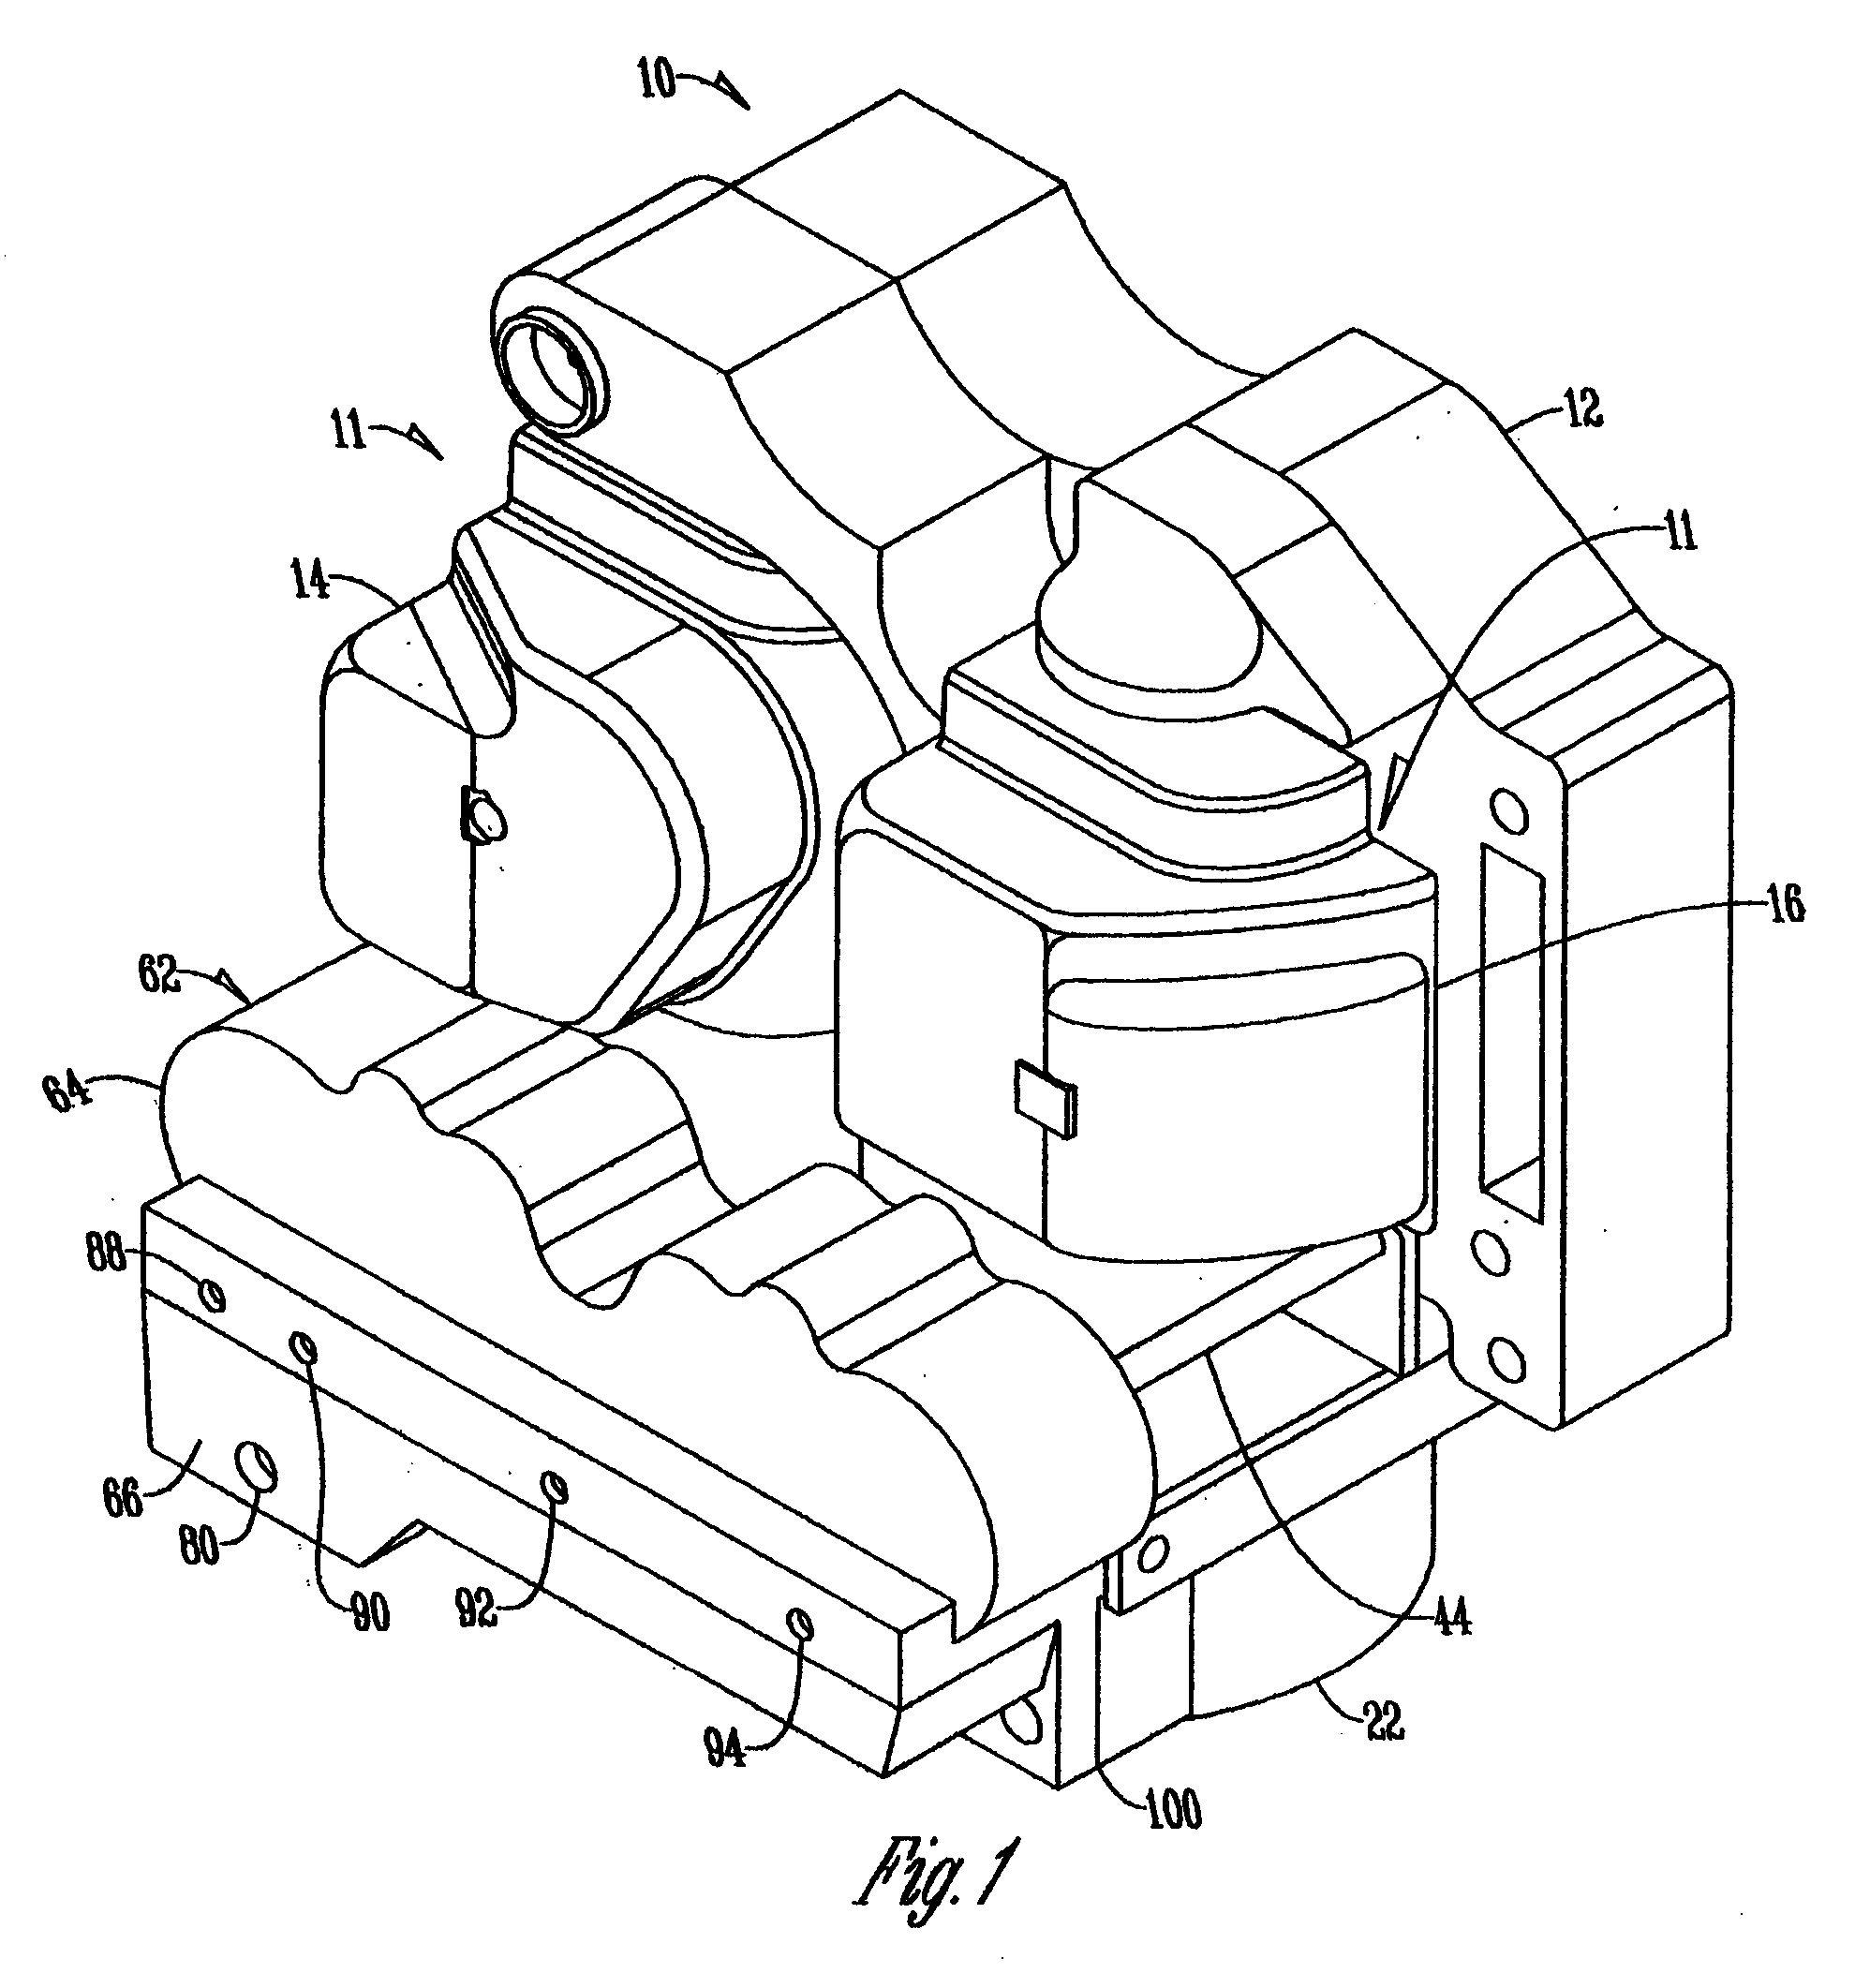 A bent axis hydrostatic module with multiple yokes